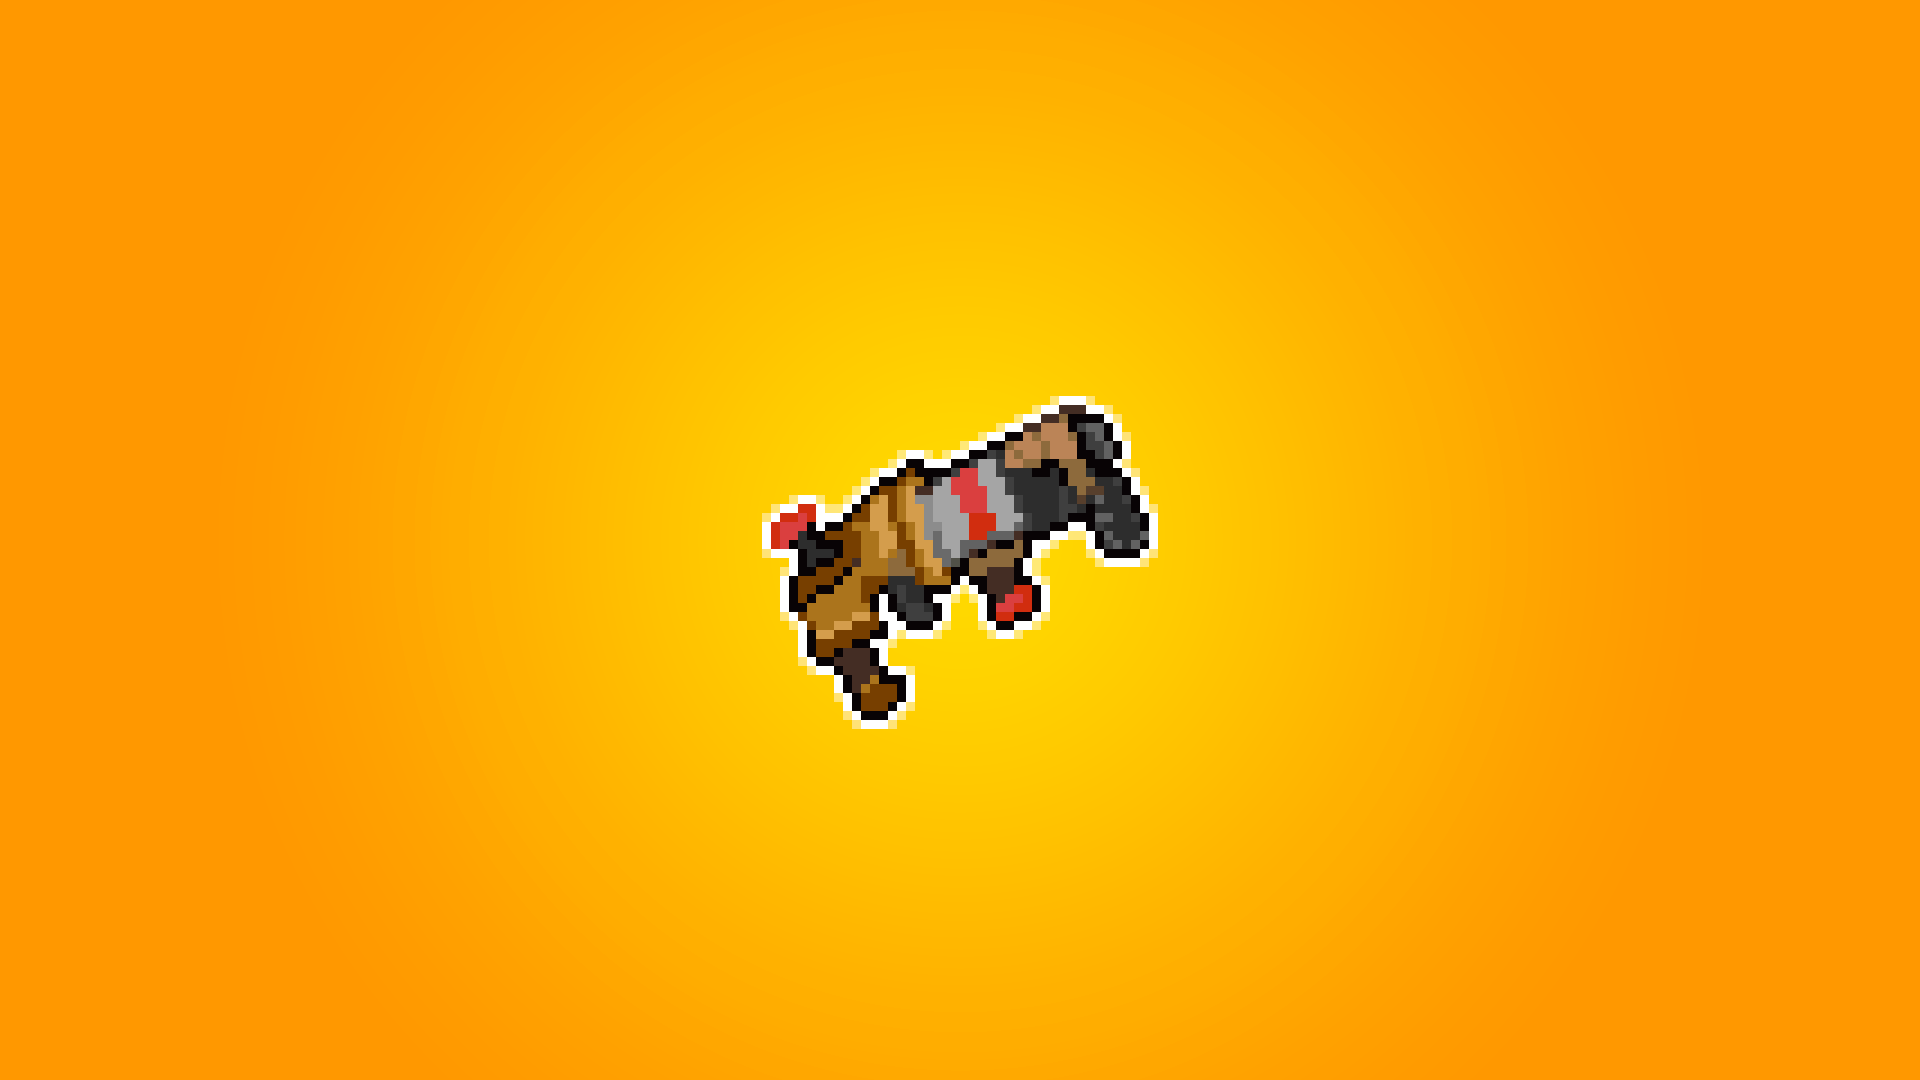 Icon for Junk Hunter